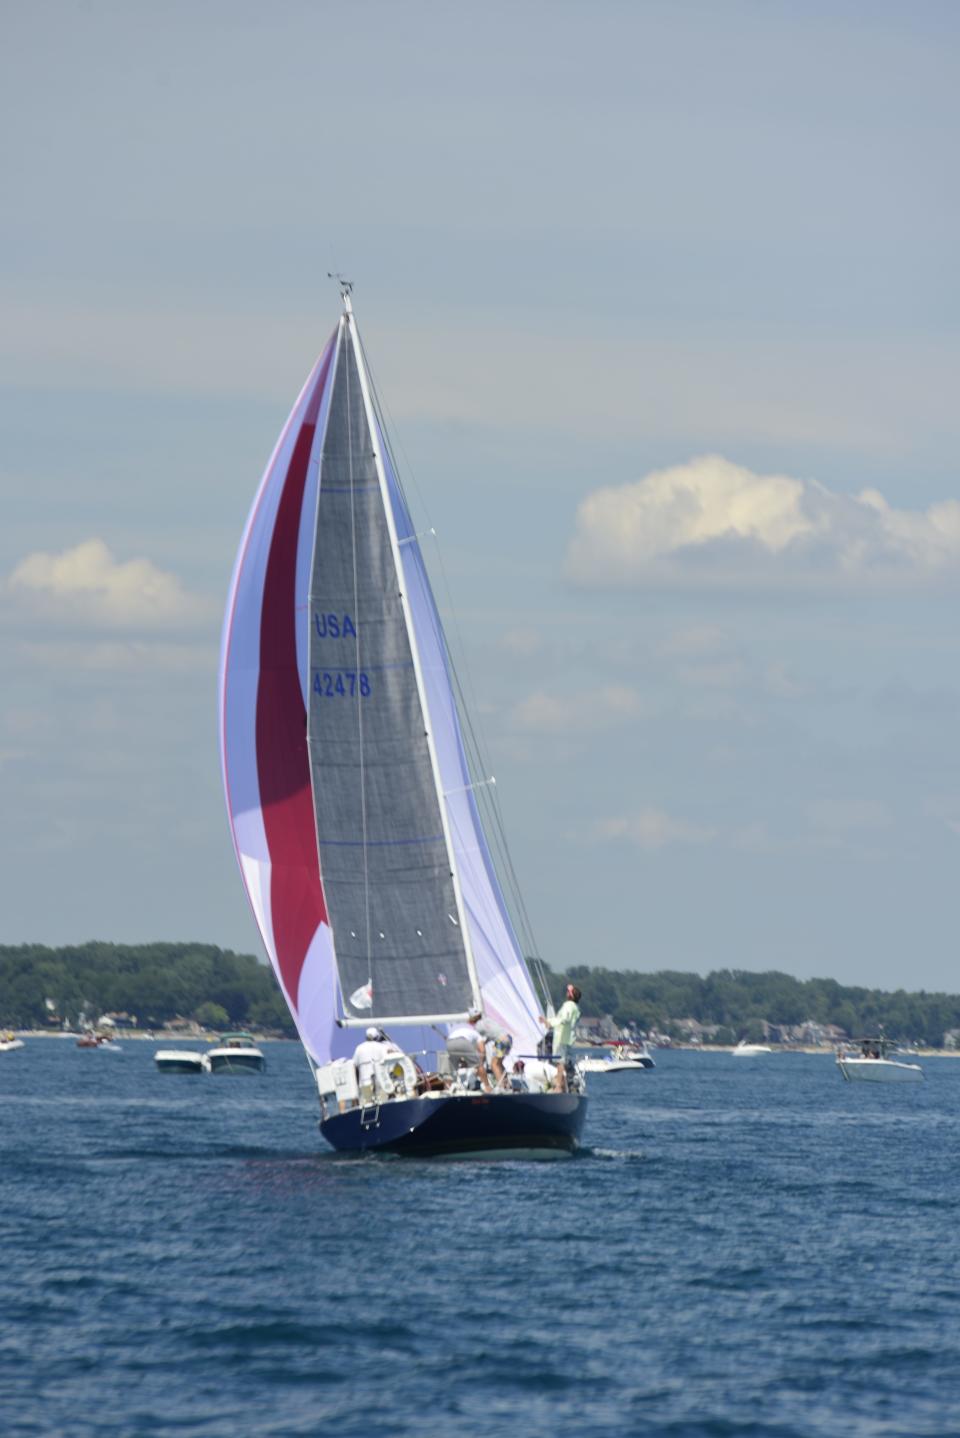 Royal Blue, captained by R. Gregory Fisher sets sail during the start of the Bayview Mackinac Race in Port Huron on Saturday, July 16, 2022.